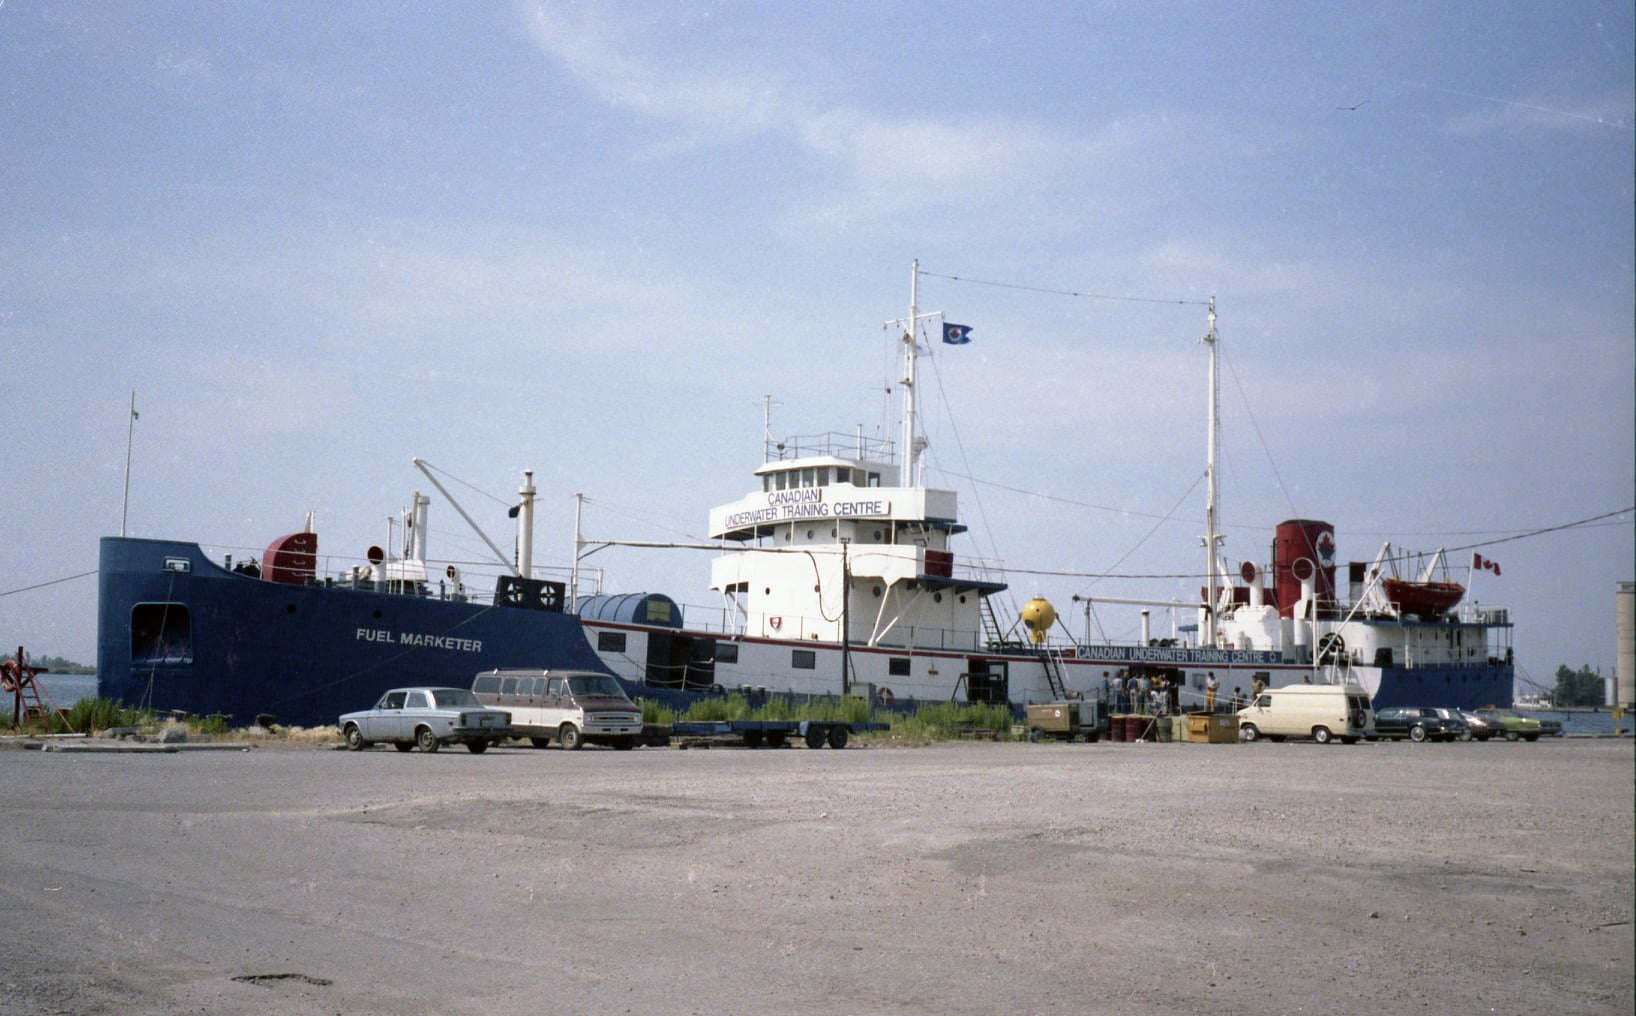 The 'Fuel Marketer' moored in Toronto's Portlands as the Canadian Underwater Training Centre, 1981